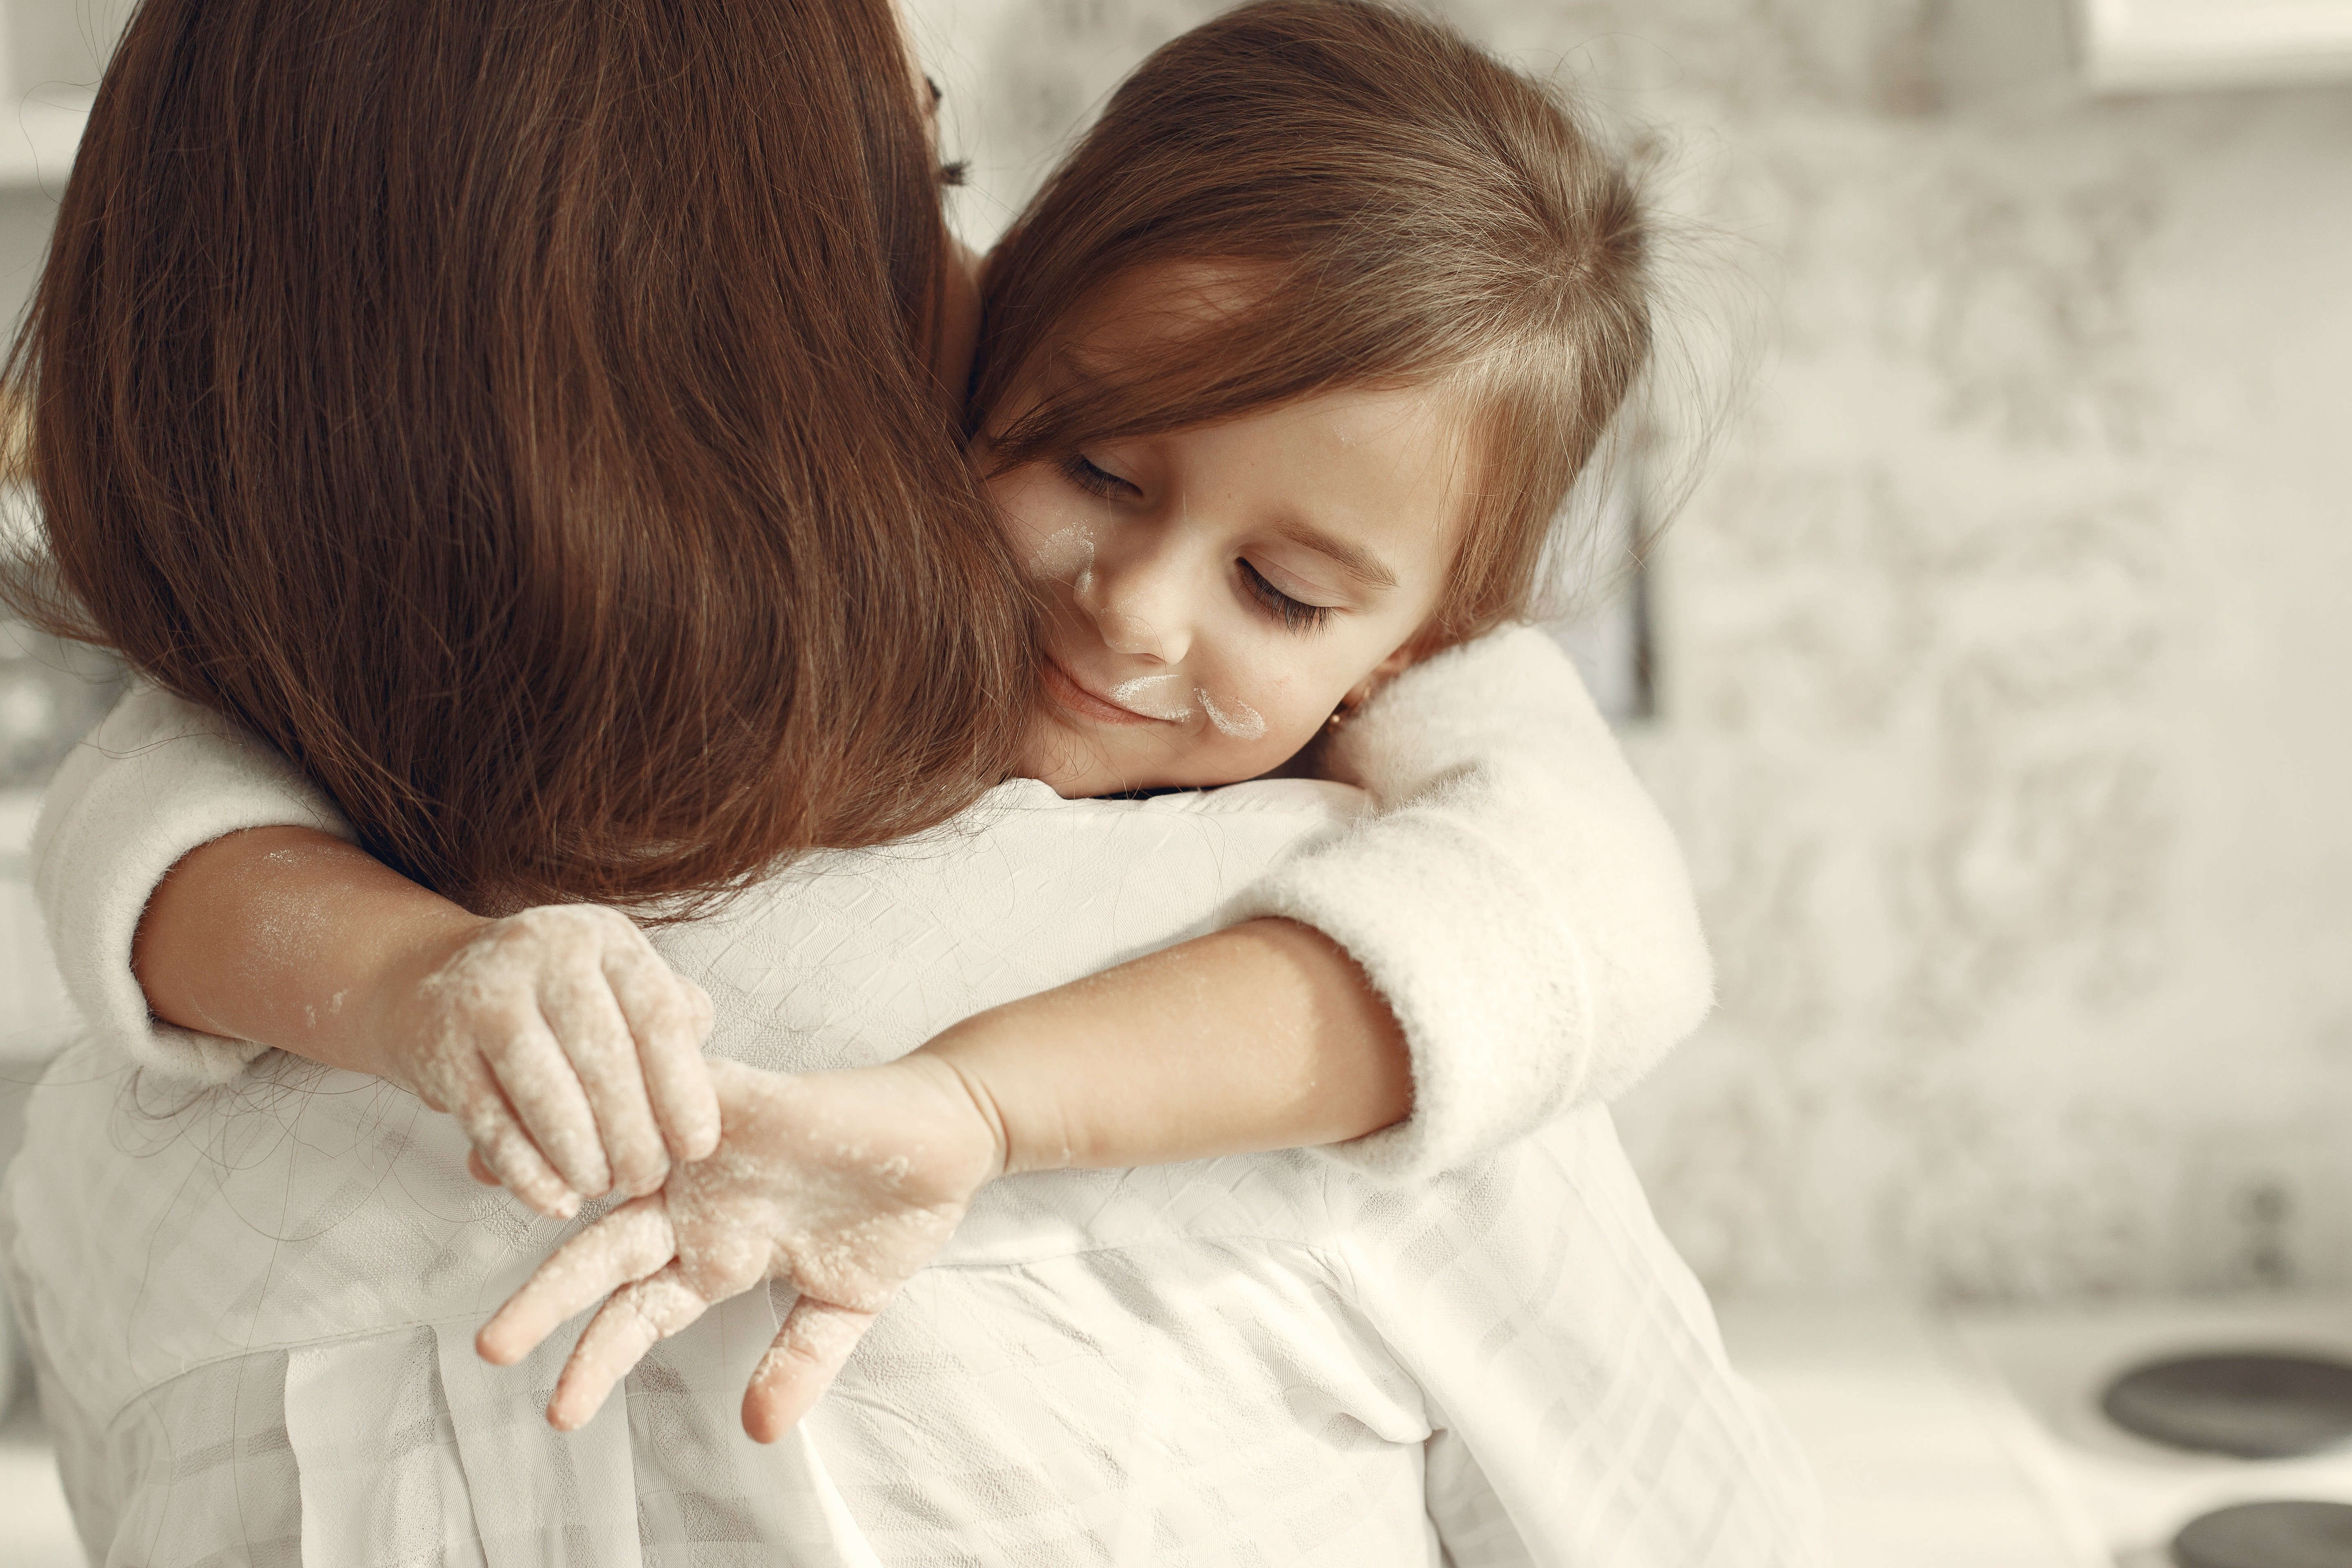 After knowing the truth about her birth, Lily told Karen that she was the best mother. | Source: Pexels